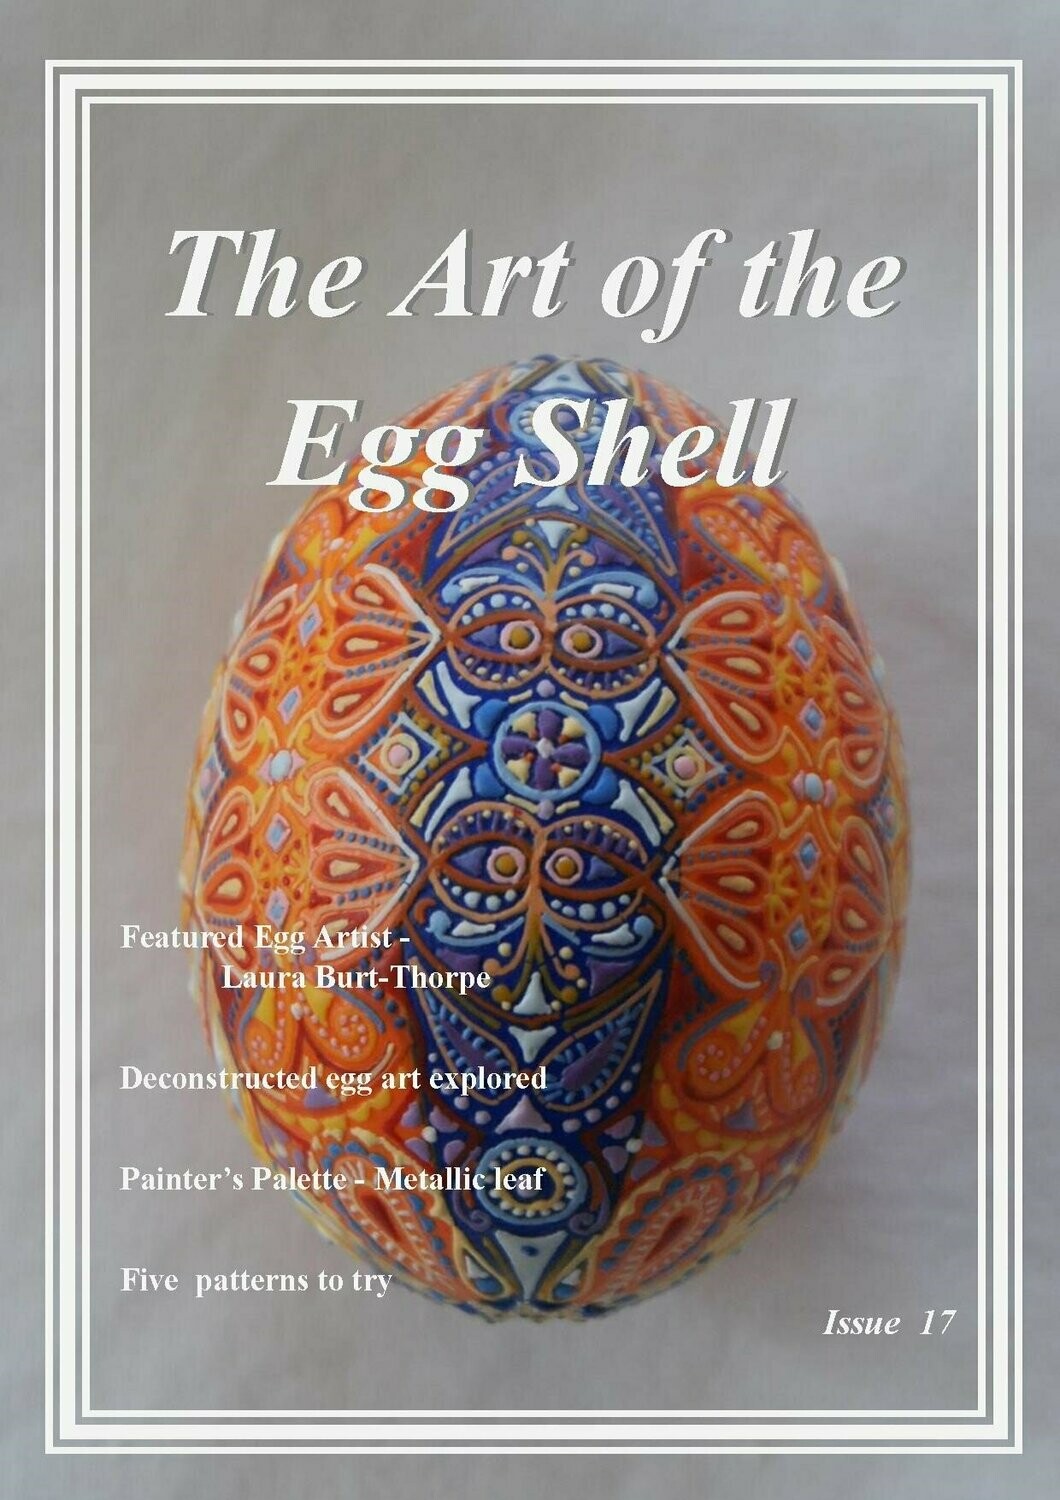 PDF Downloadable - The Art of the Egg Shell - Issue 17